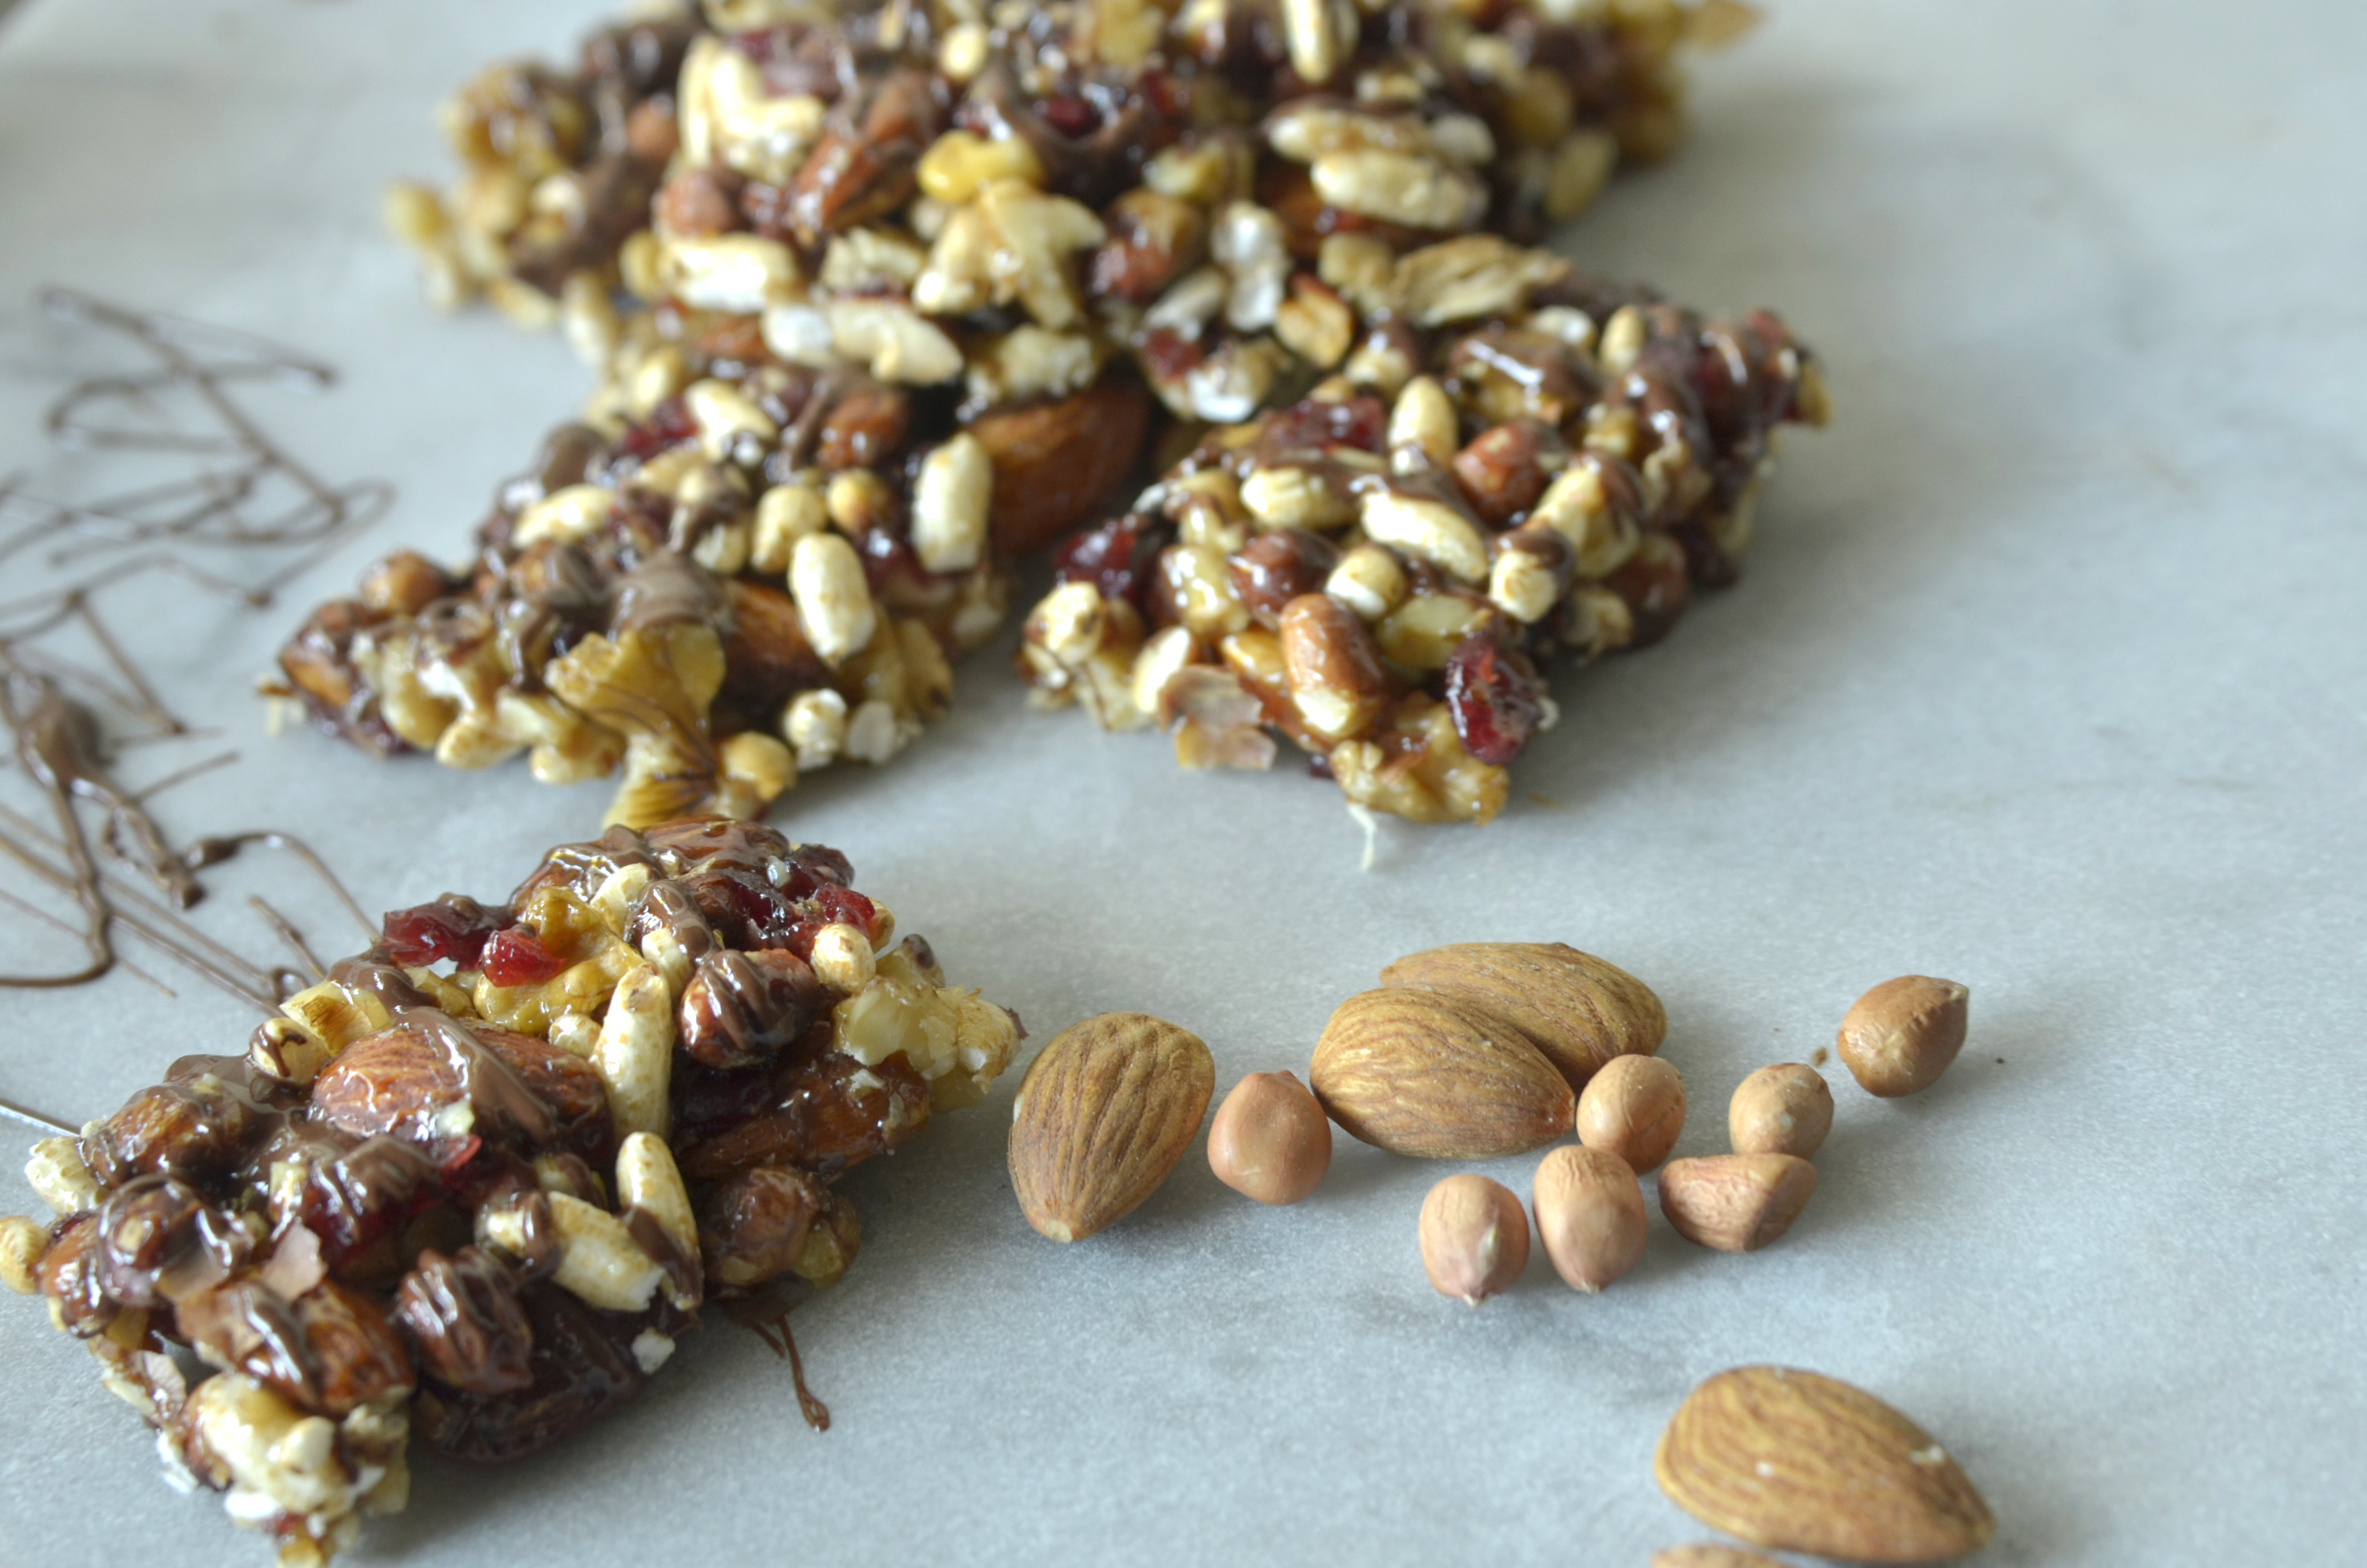 Any mix of nuts works well for this recipe